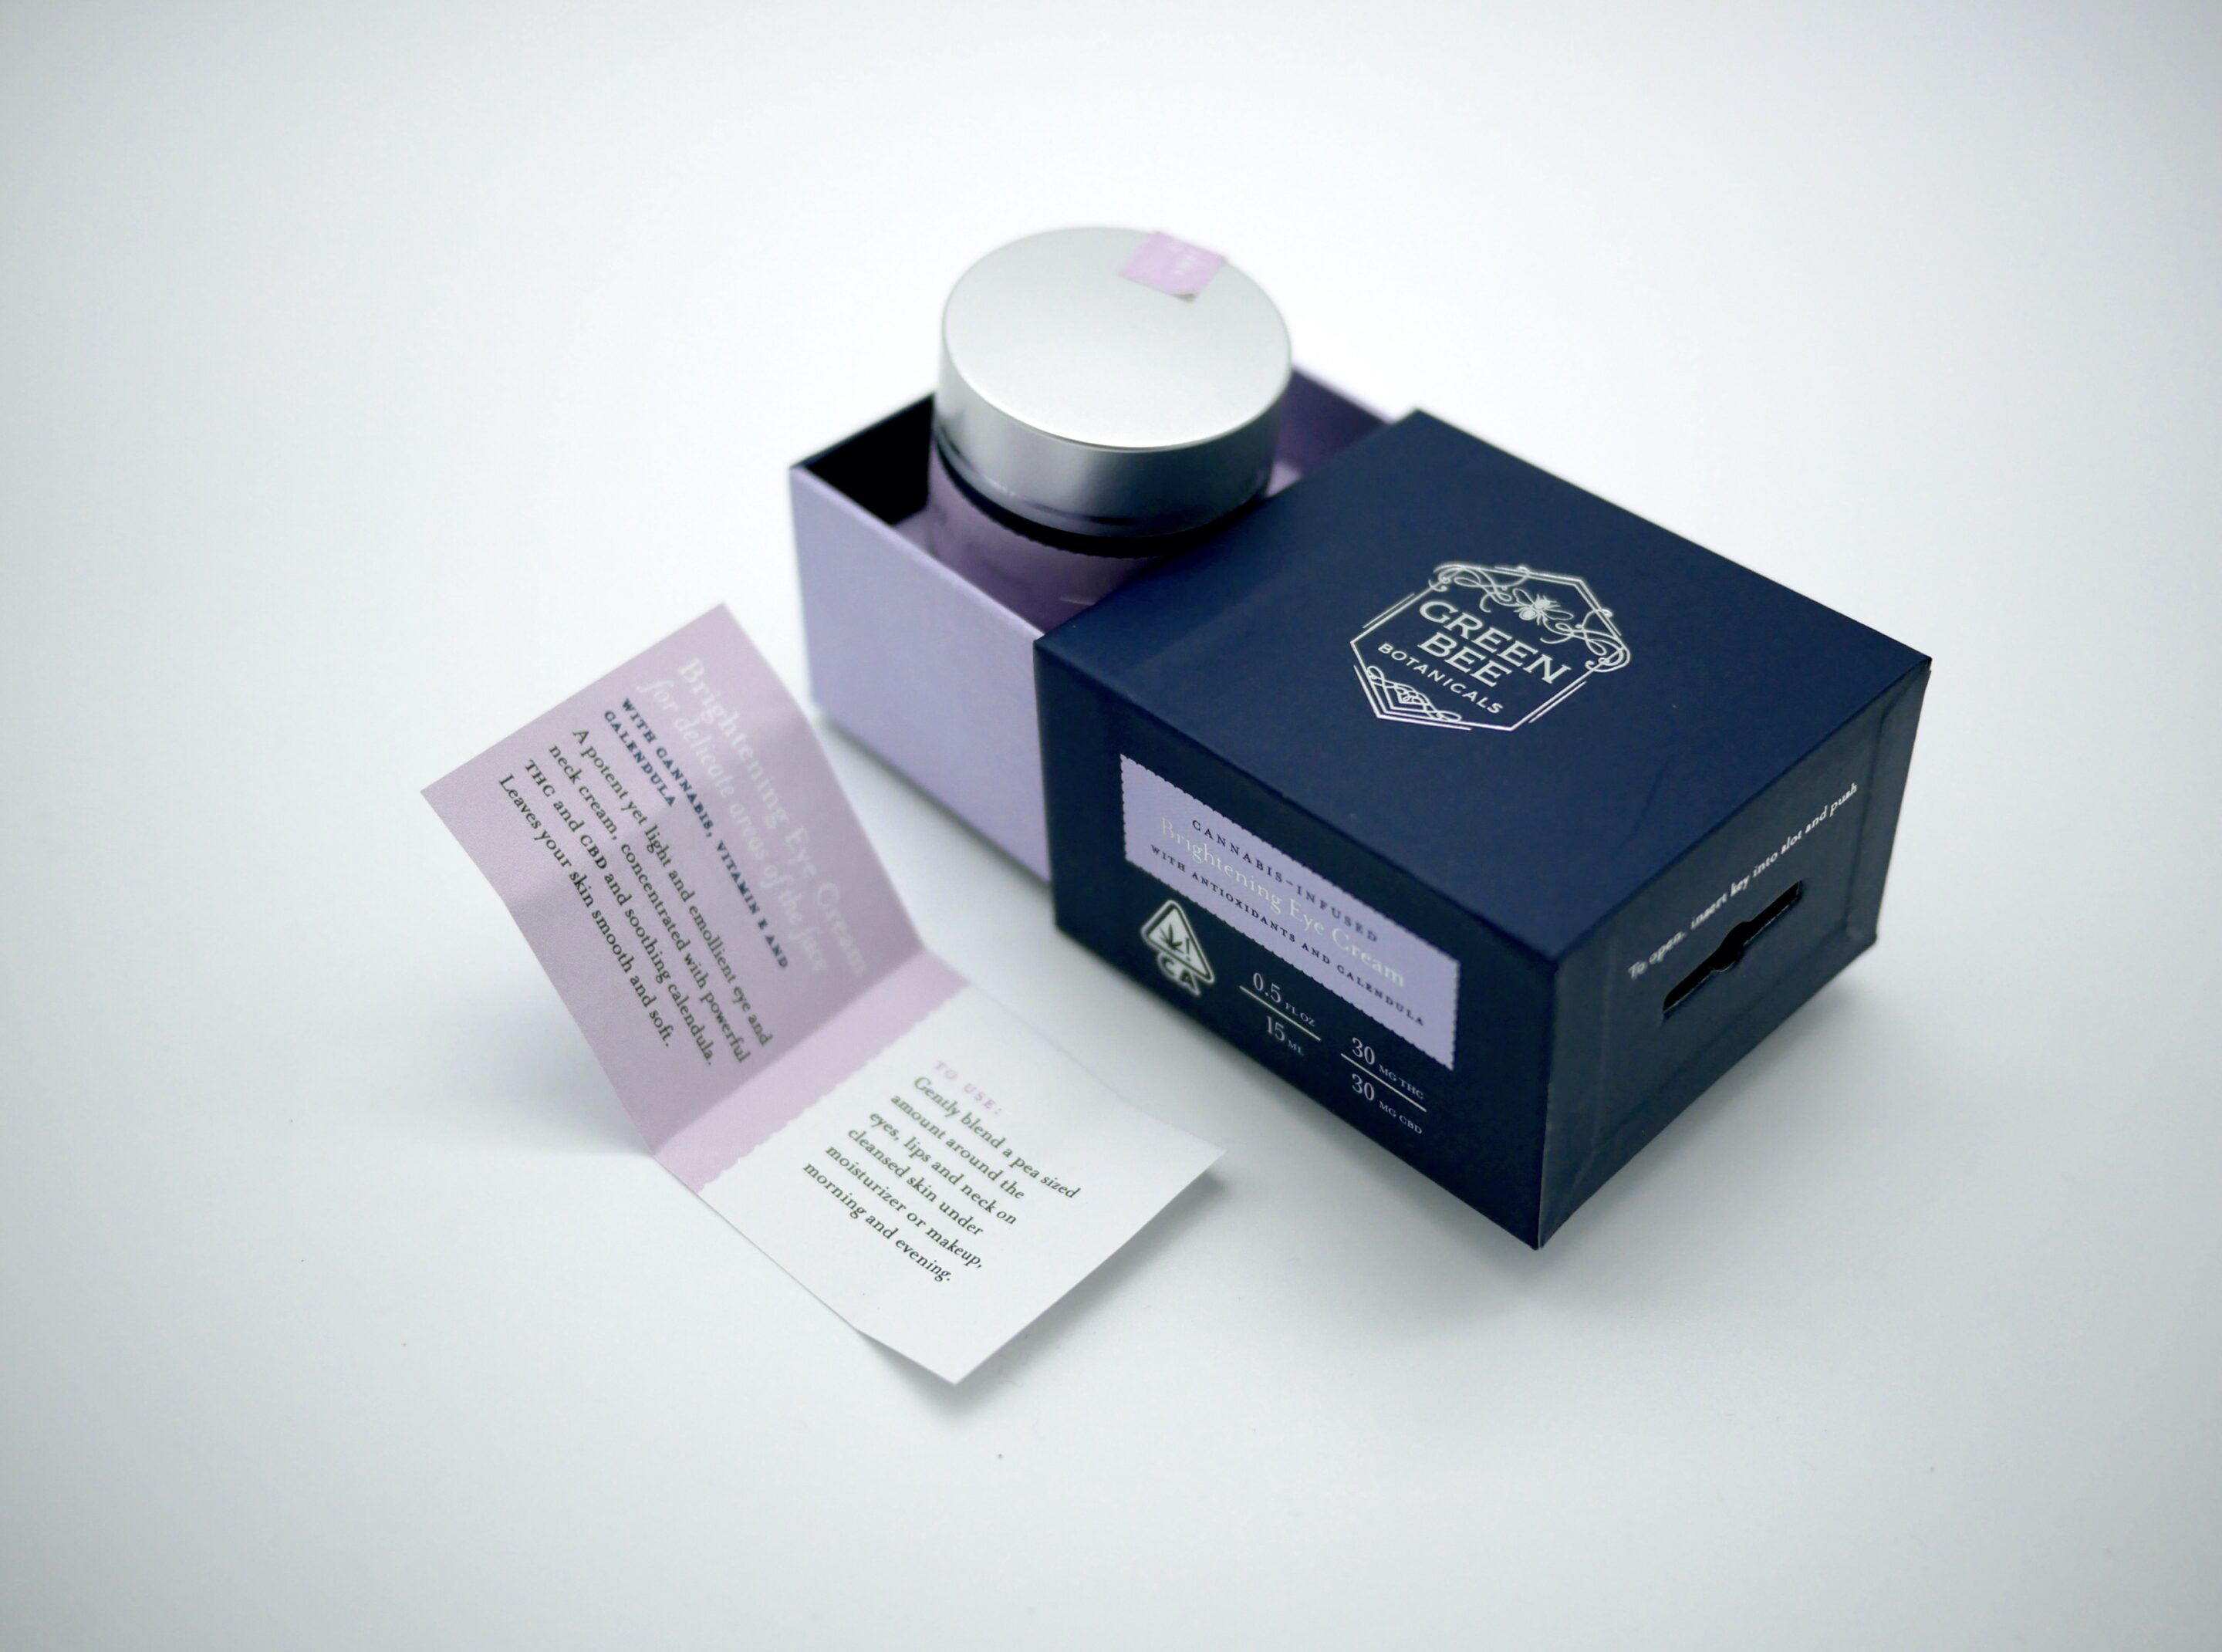 child-resistant box for lotion topical